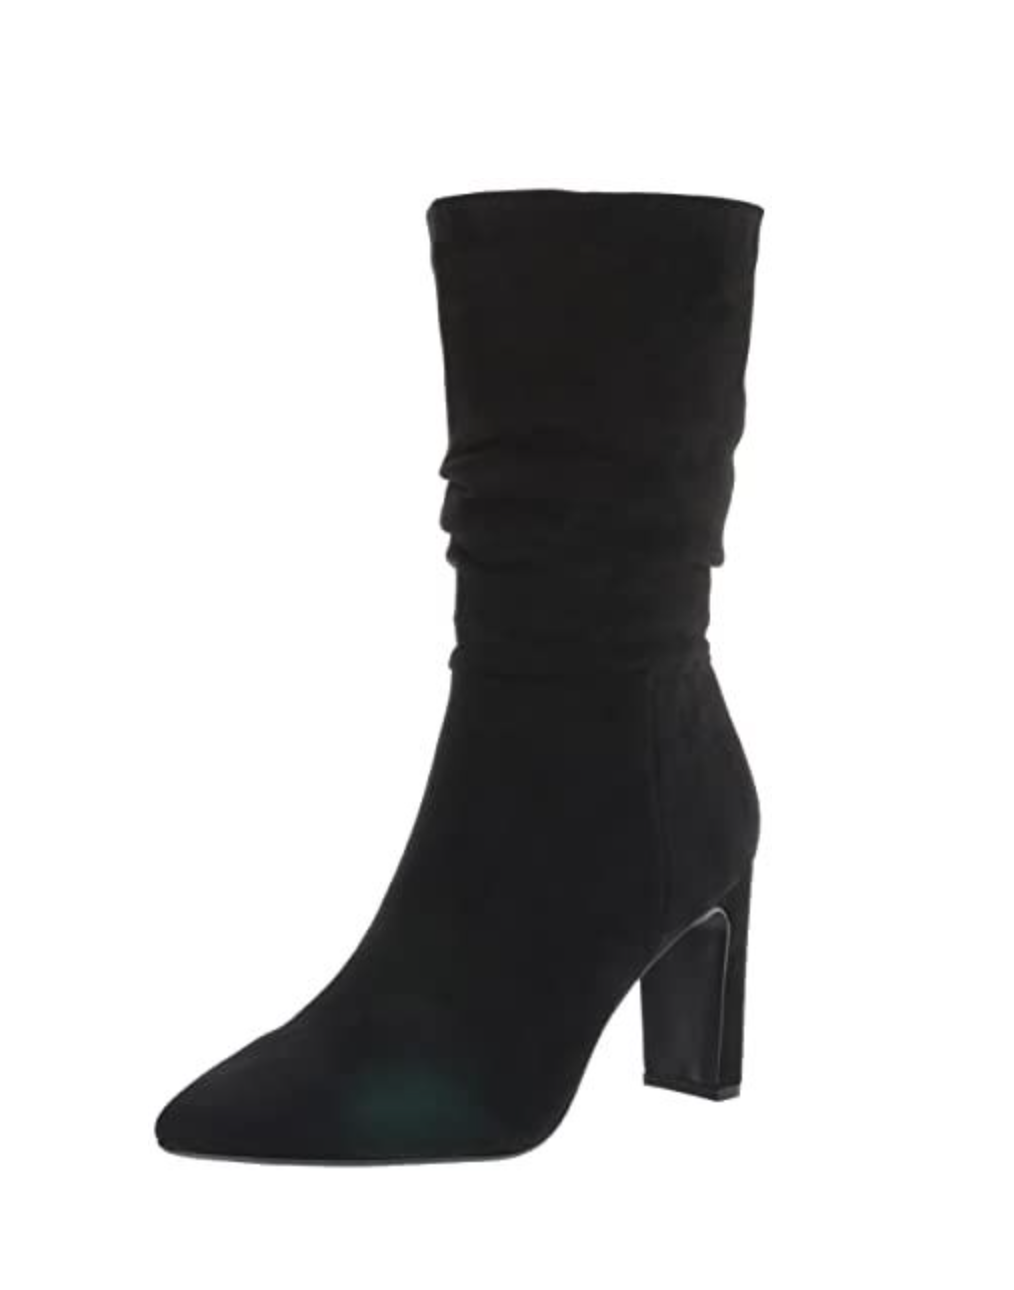 Chinese Laundry Ezra Suedette Fashion Boot